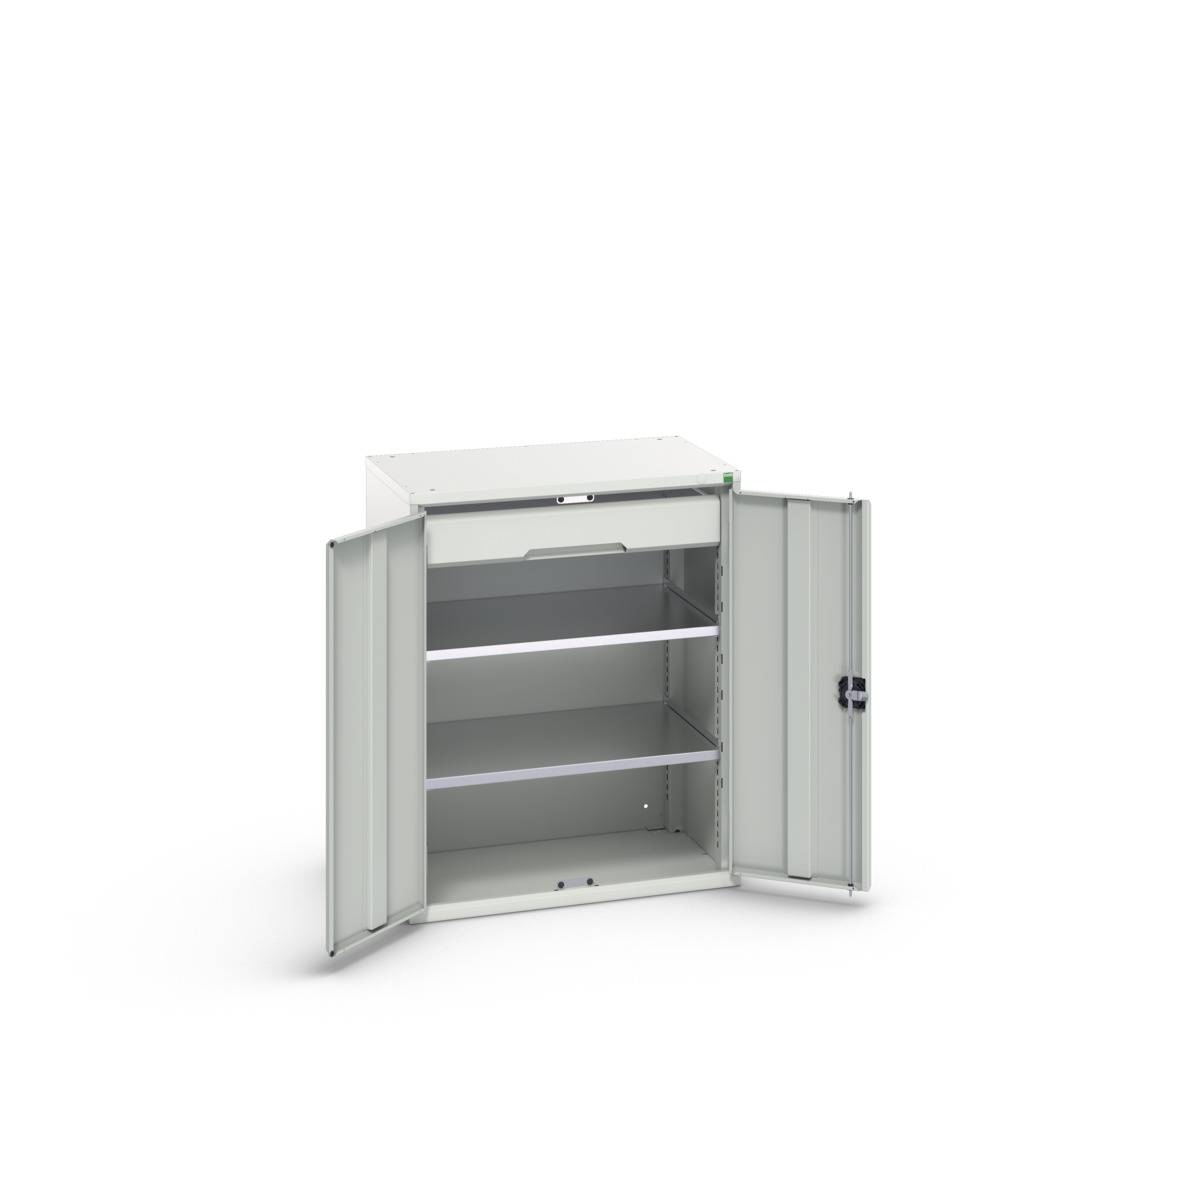 16926452.16 - verso kitted cupboard